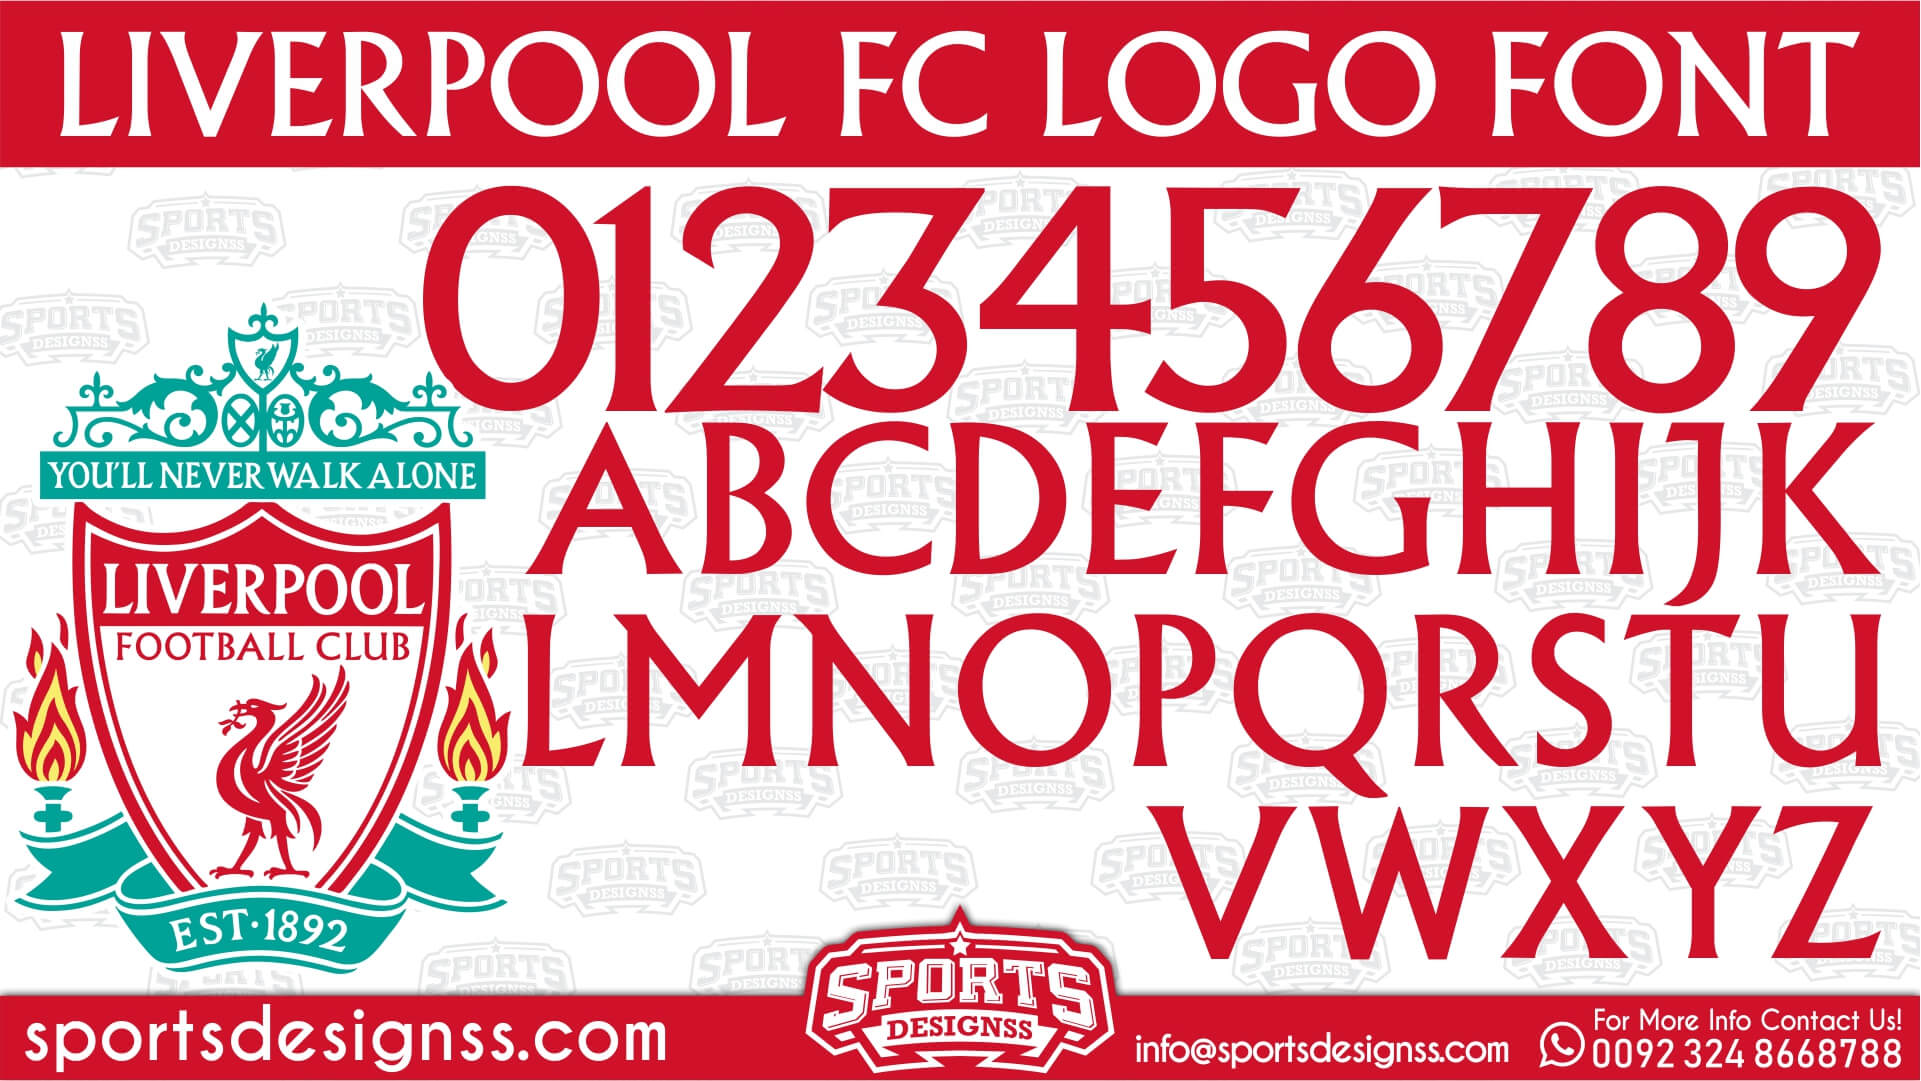 Get the Official Liverpool FC Logo Font - Download Now for Free_Liverpool FC Logo Font Free Download Liverpool FC Logo Font Font Football Font Free Download by Sports Designss_Download Liverpool FC Logo Font Font for free